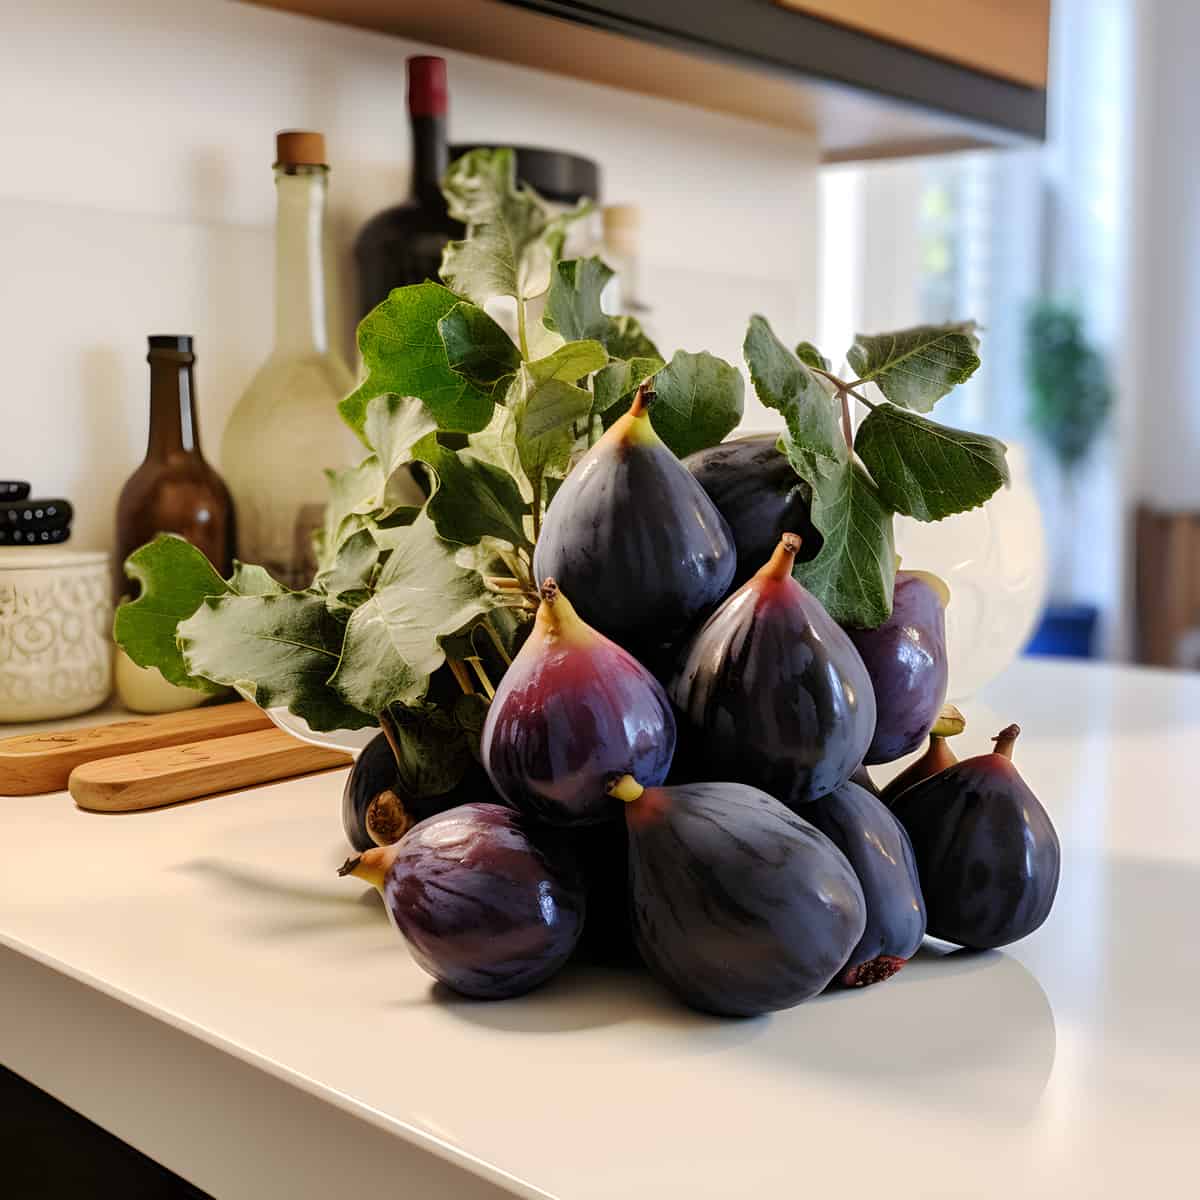 Cluster Fig Fruit on a kitchen counter